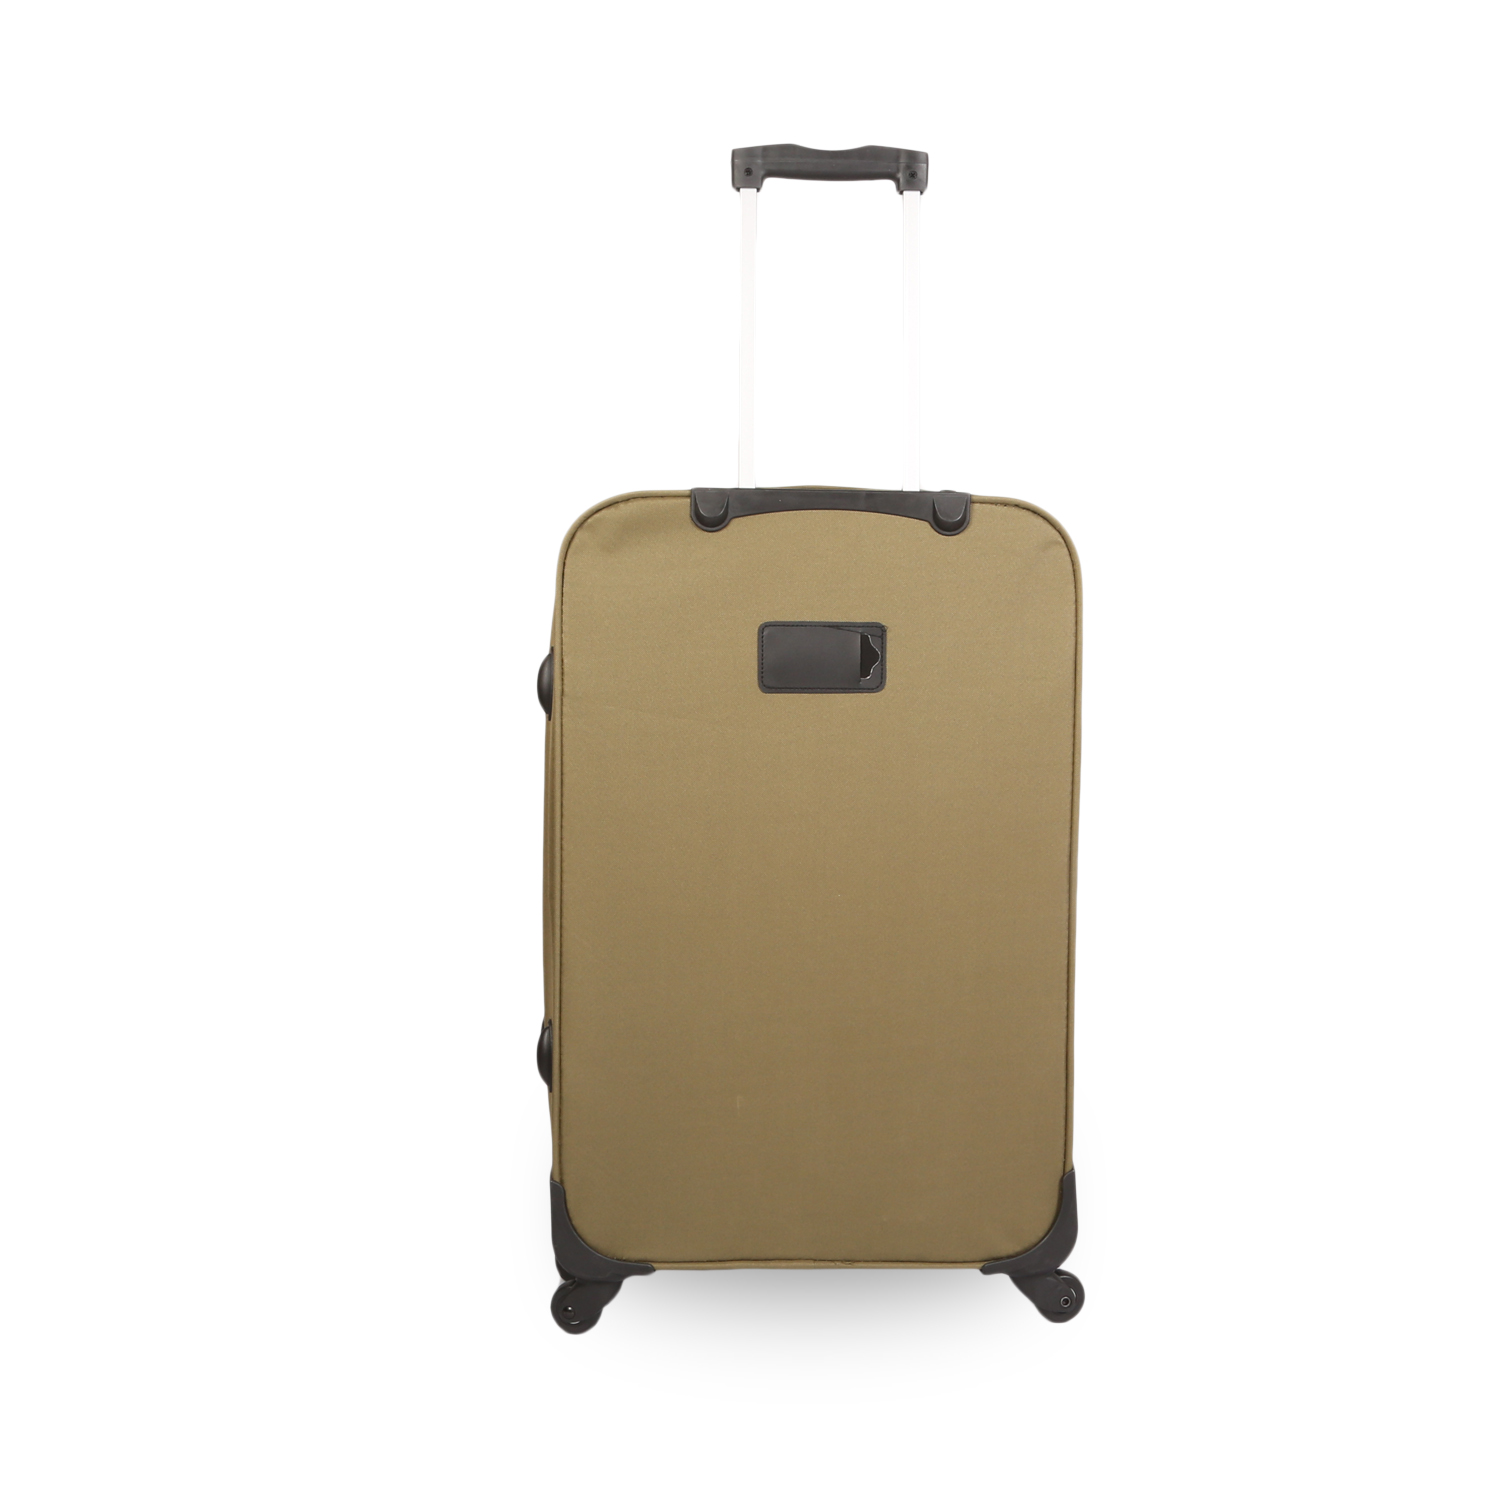 Buy Fly Ion Softsided Nylon Upright Trolley Luggage for Travel Online ...